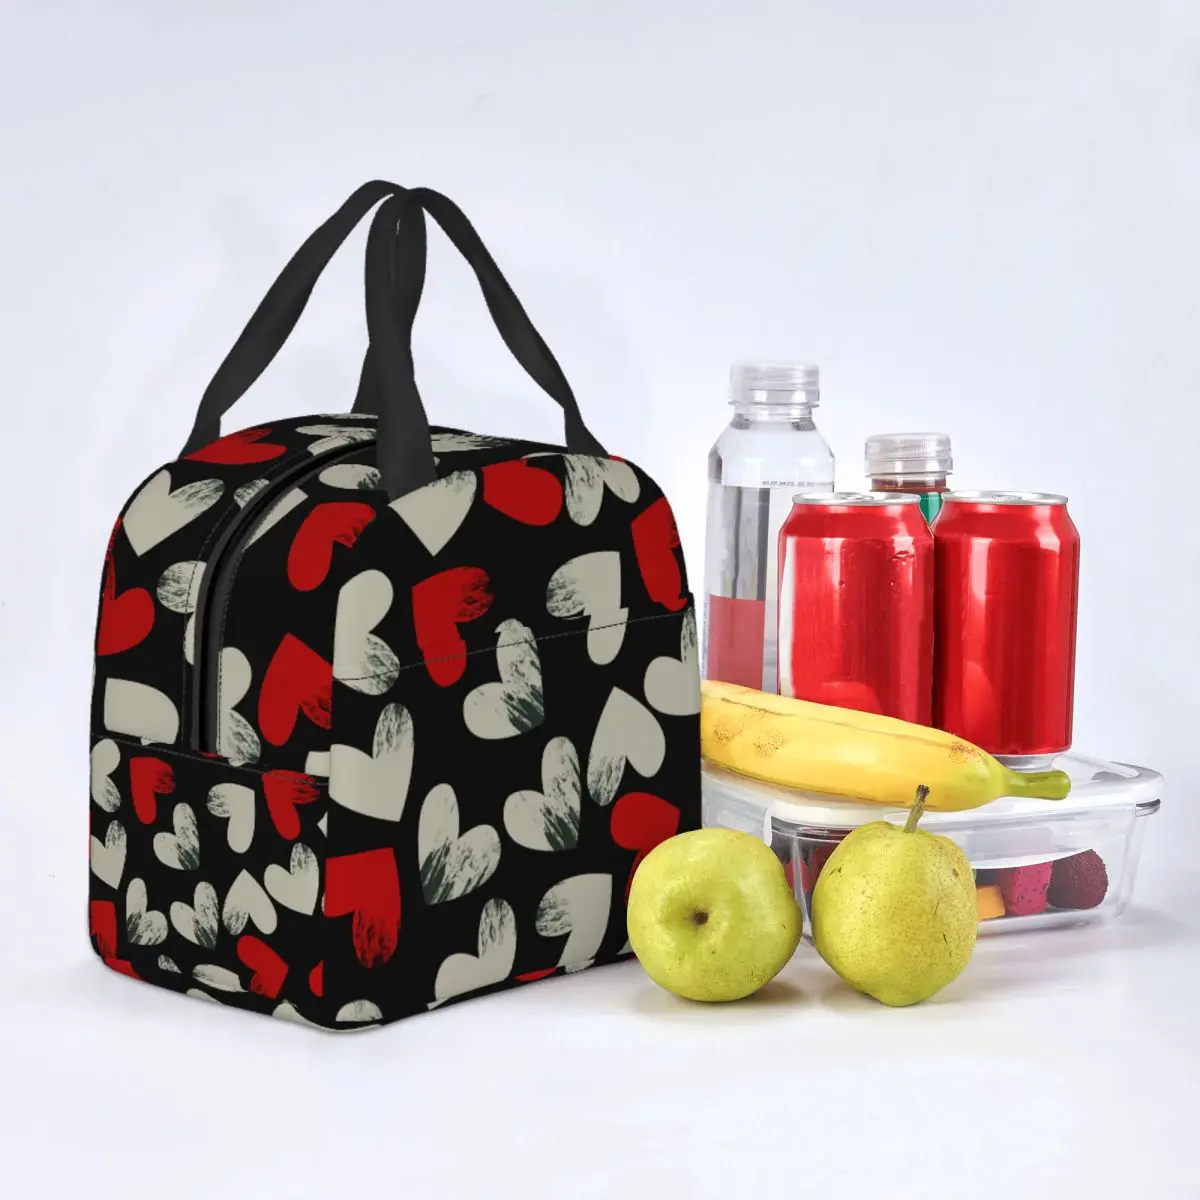 Scratched Heart Pattern Lunch Bag Portable Insulated Canvas Cooler Thermal Food Picnic Work Lunch Box for Women Girl